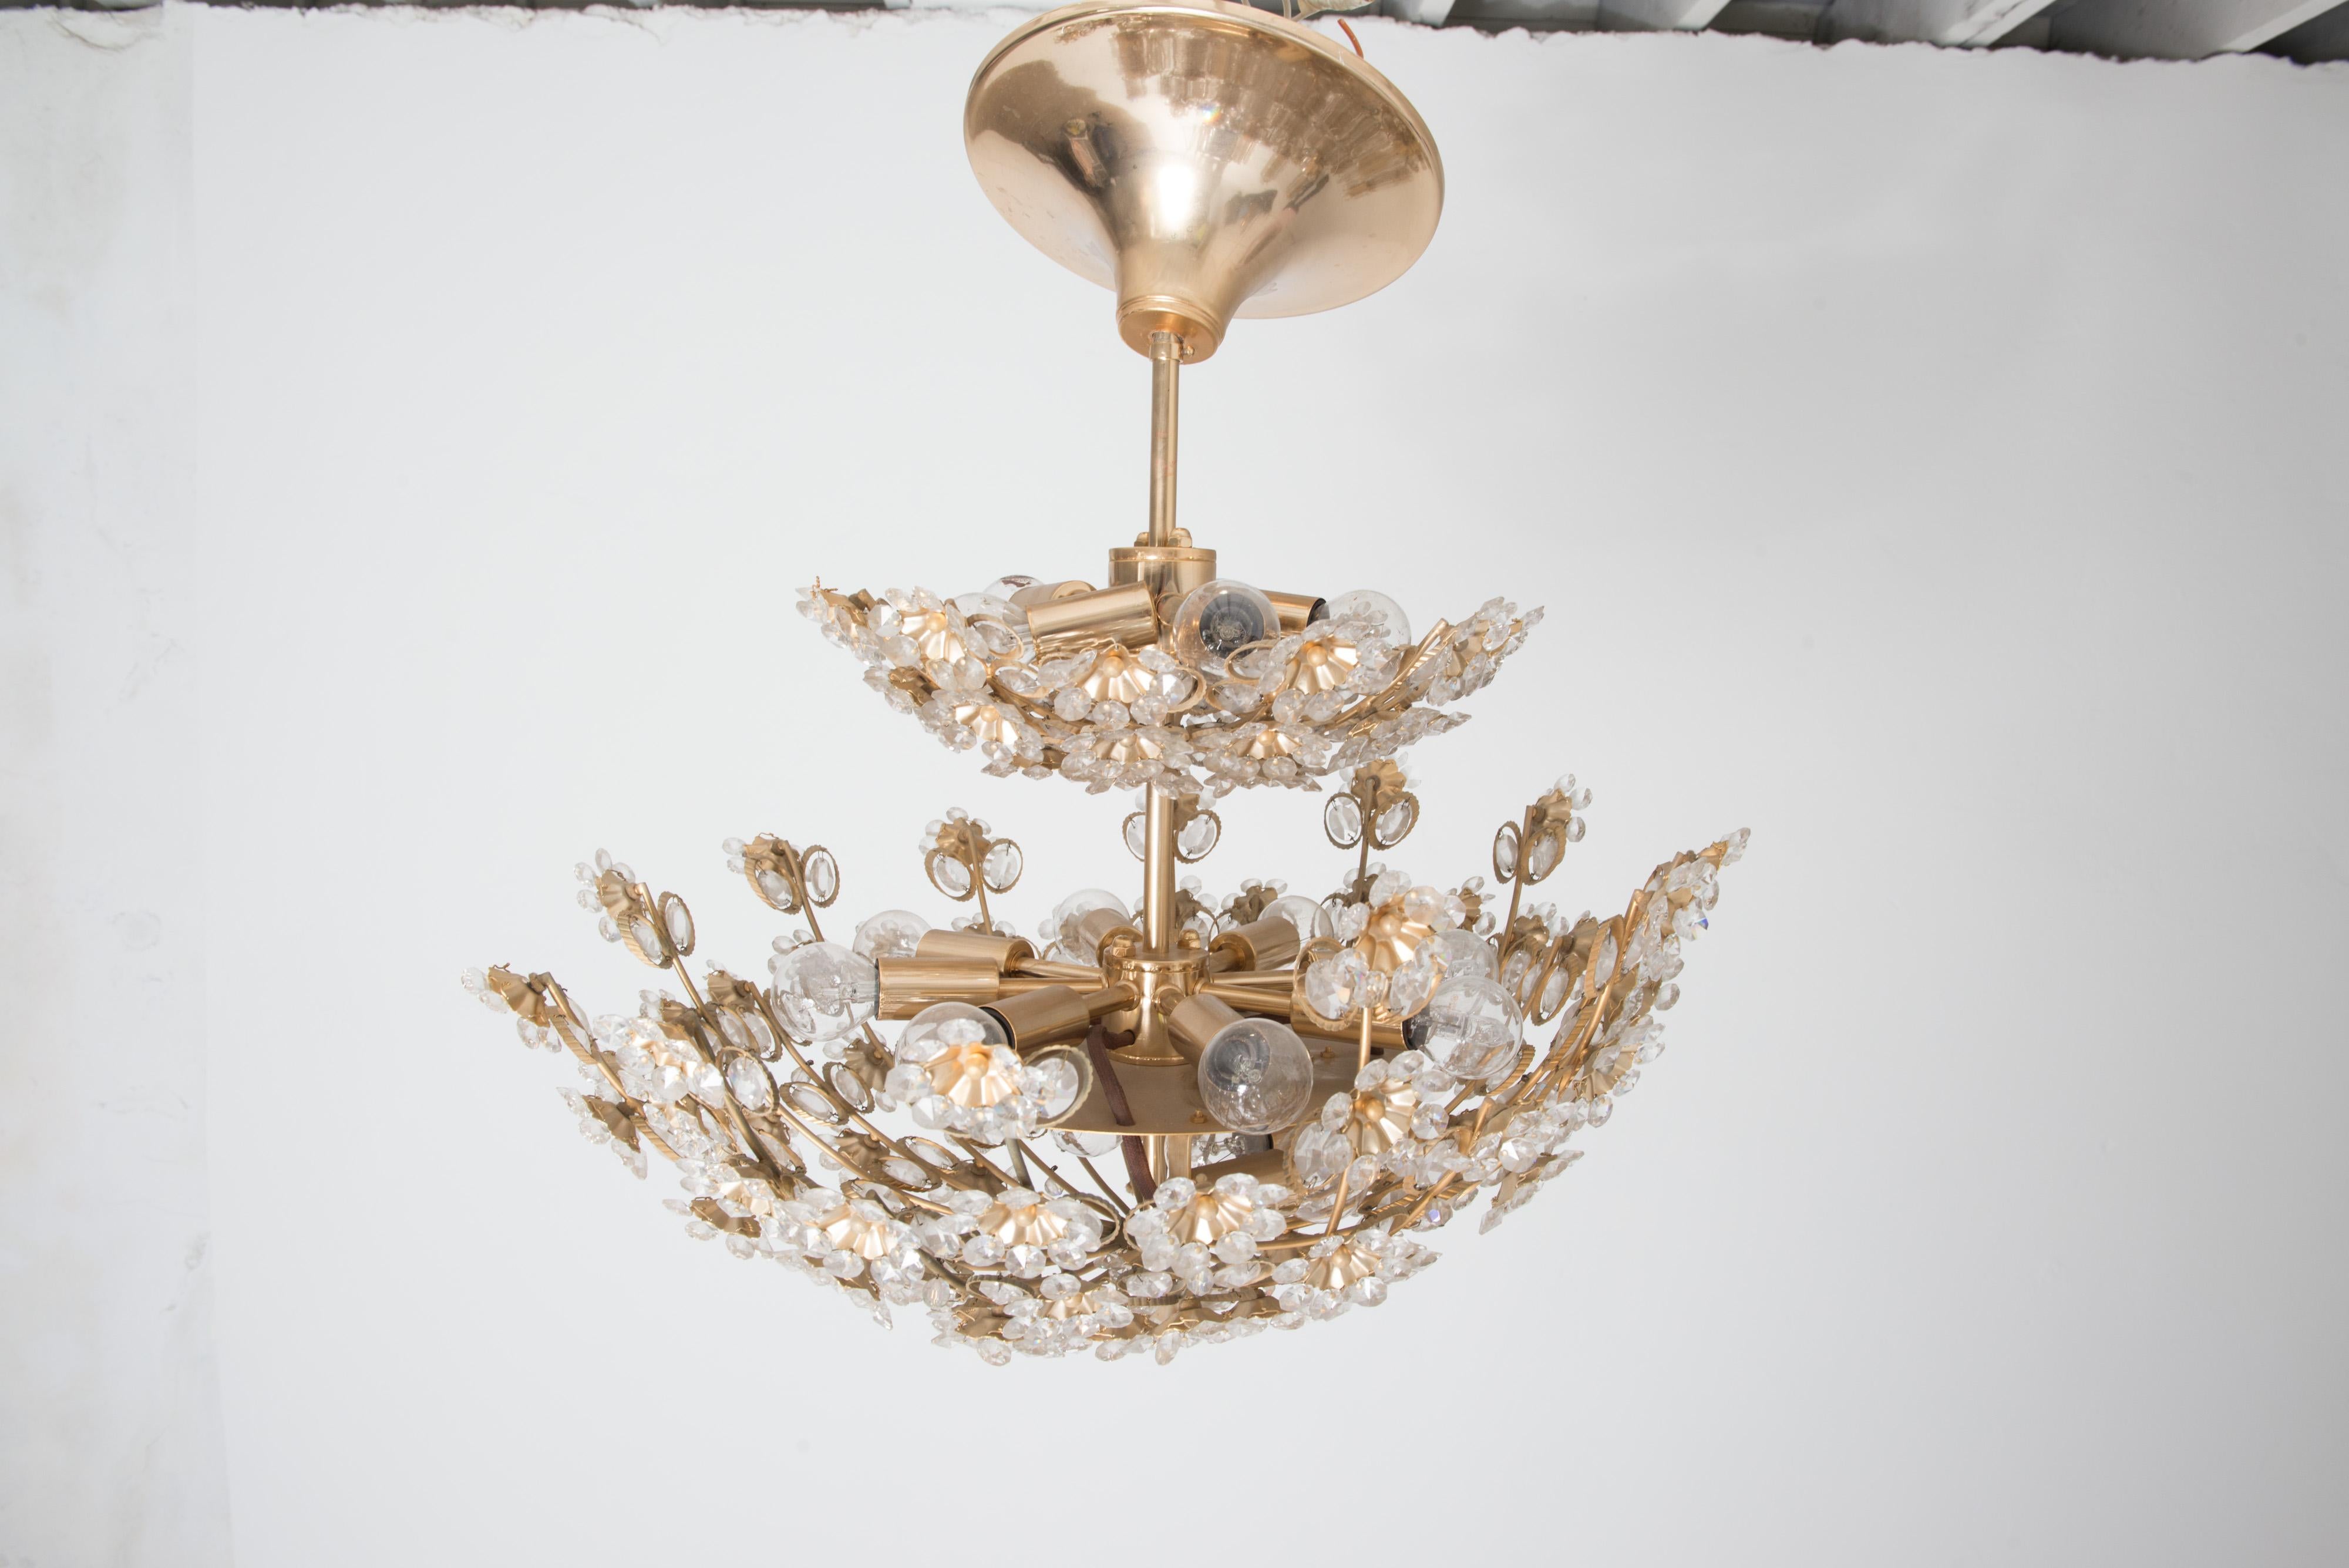 Two Gilt Brass Cut Glass Flower Tiered Chandeliers, by Palwa, Germany In Good Condition For Sale In Stamford, CT